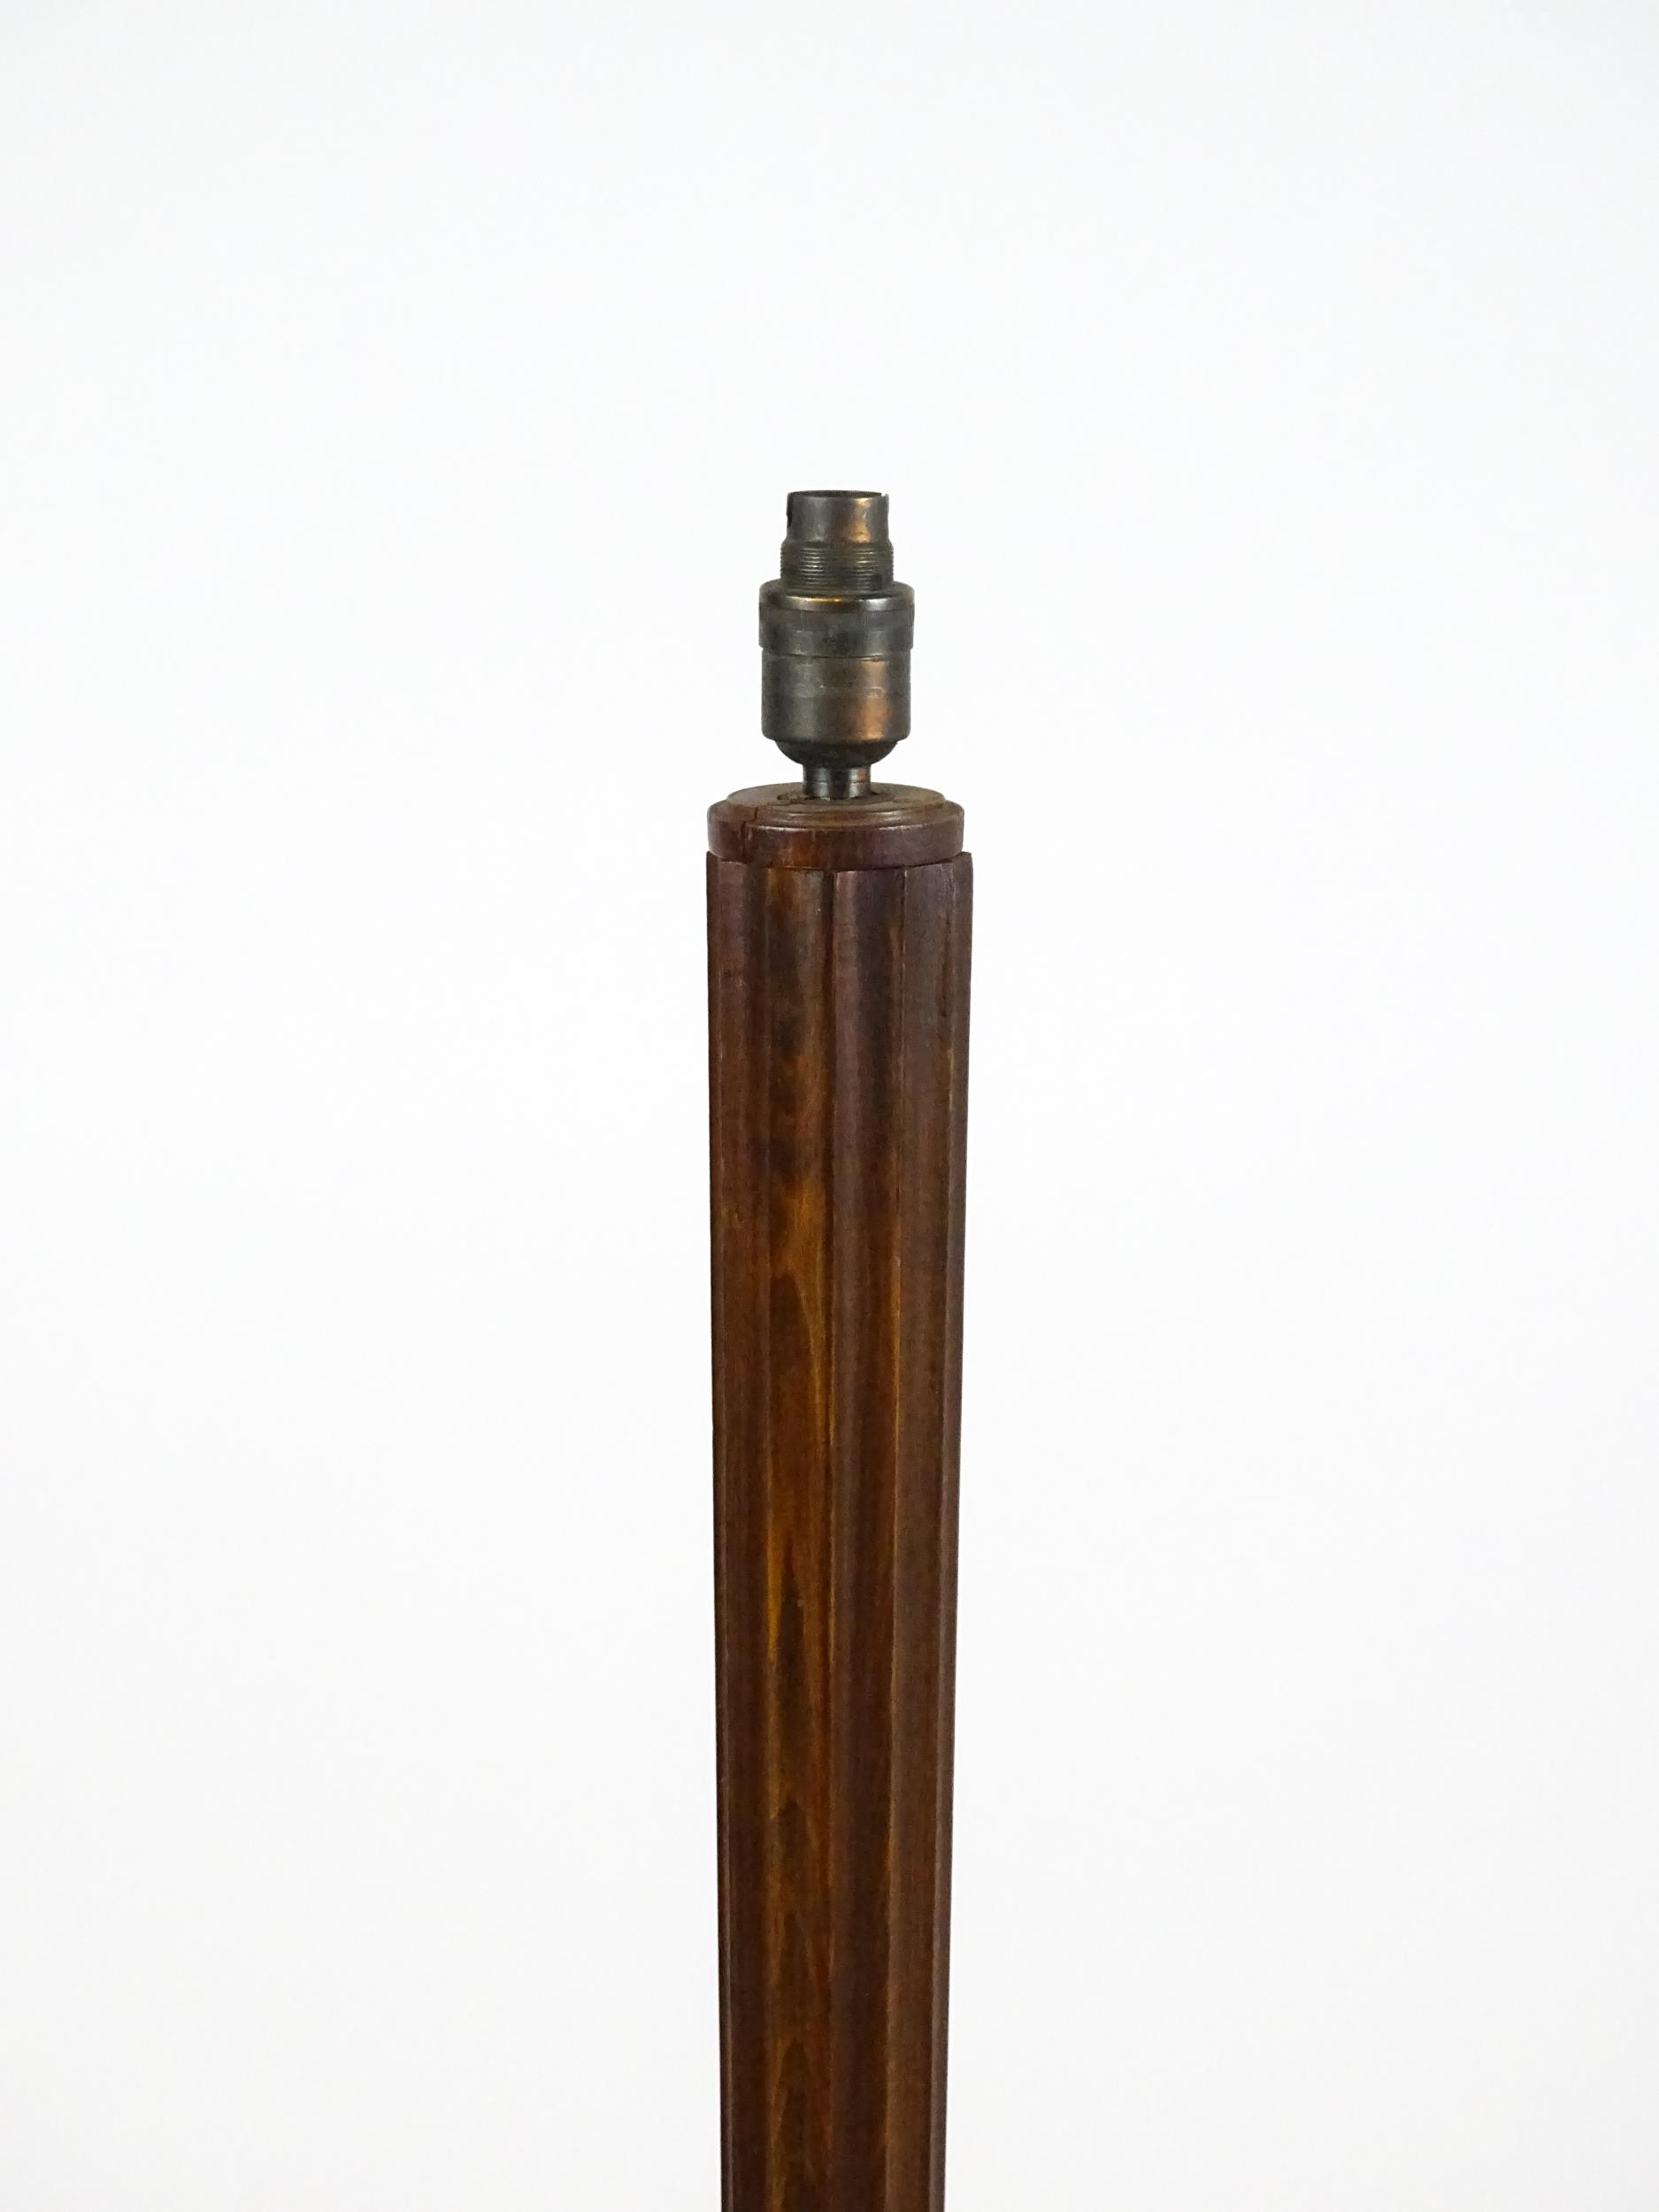 An Art Deco style oak standard lamp with a chamfered stem and a moulded hexagonal base. Approx. - Image 7 of 7